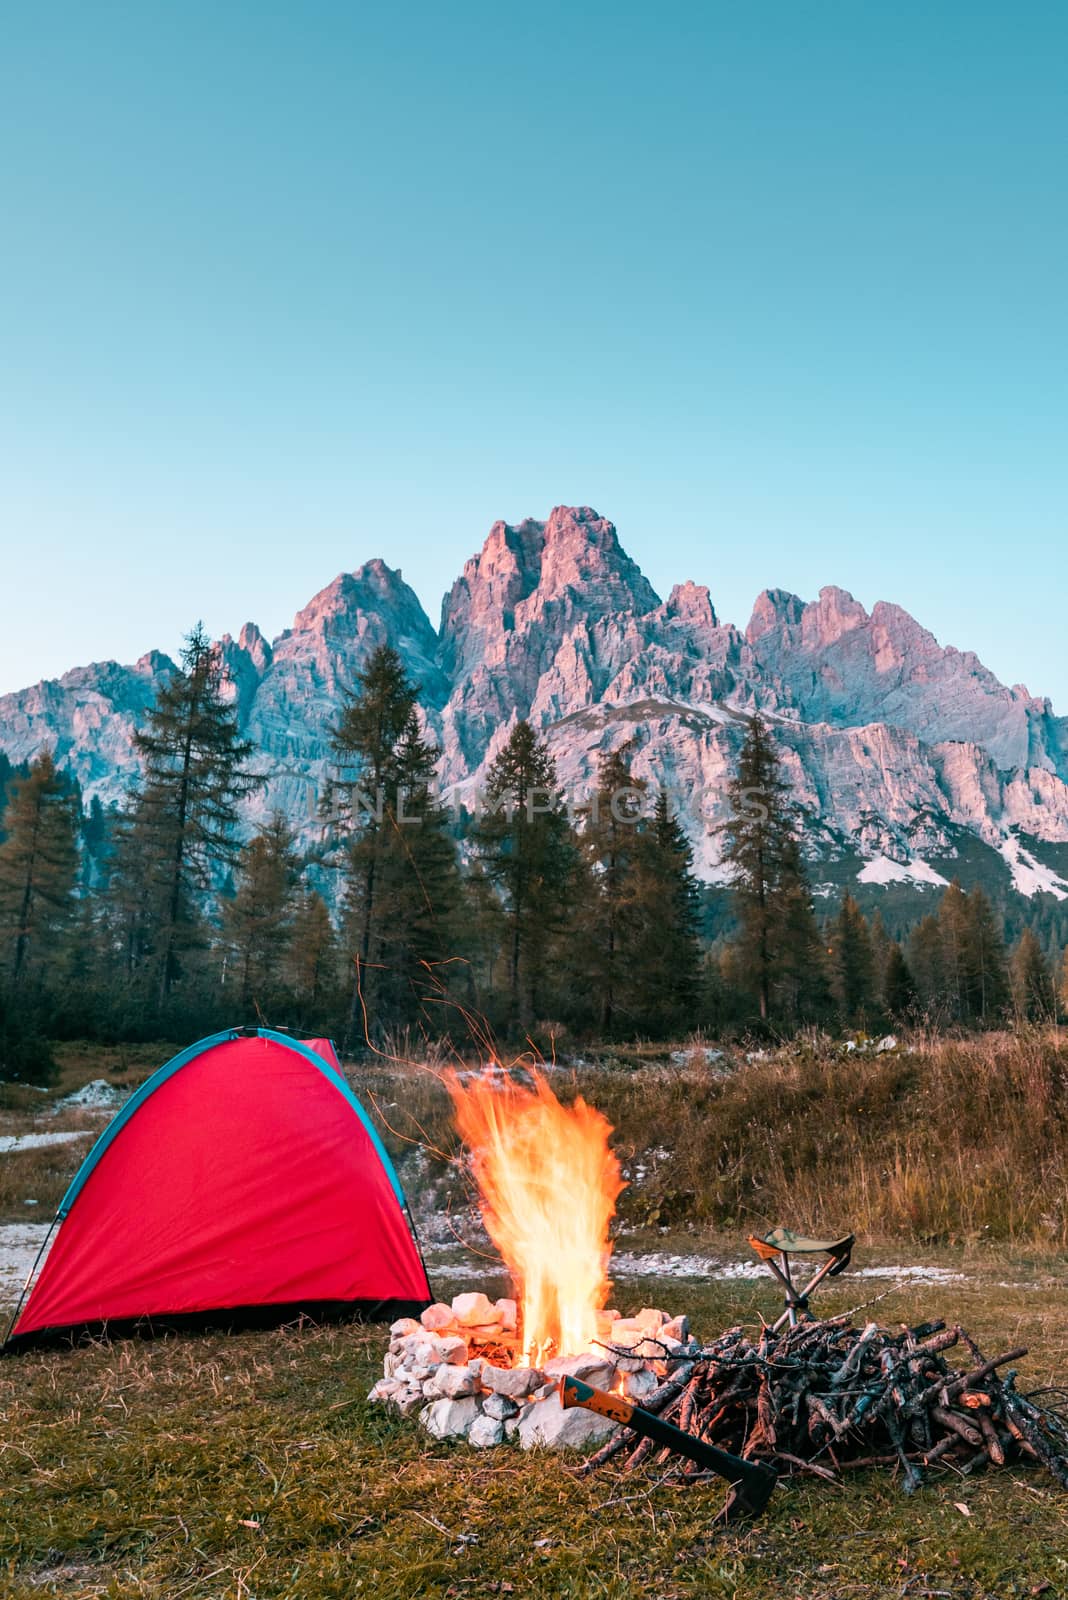 Campfire and Tent in Mountains. Leisure Activity Outdoors.